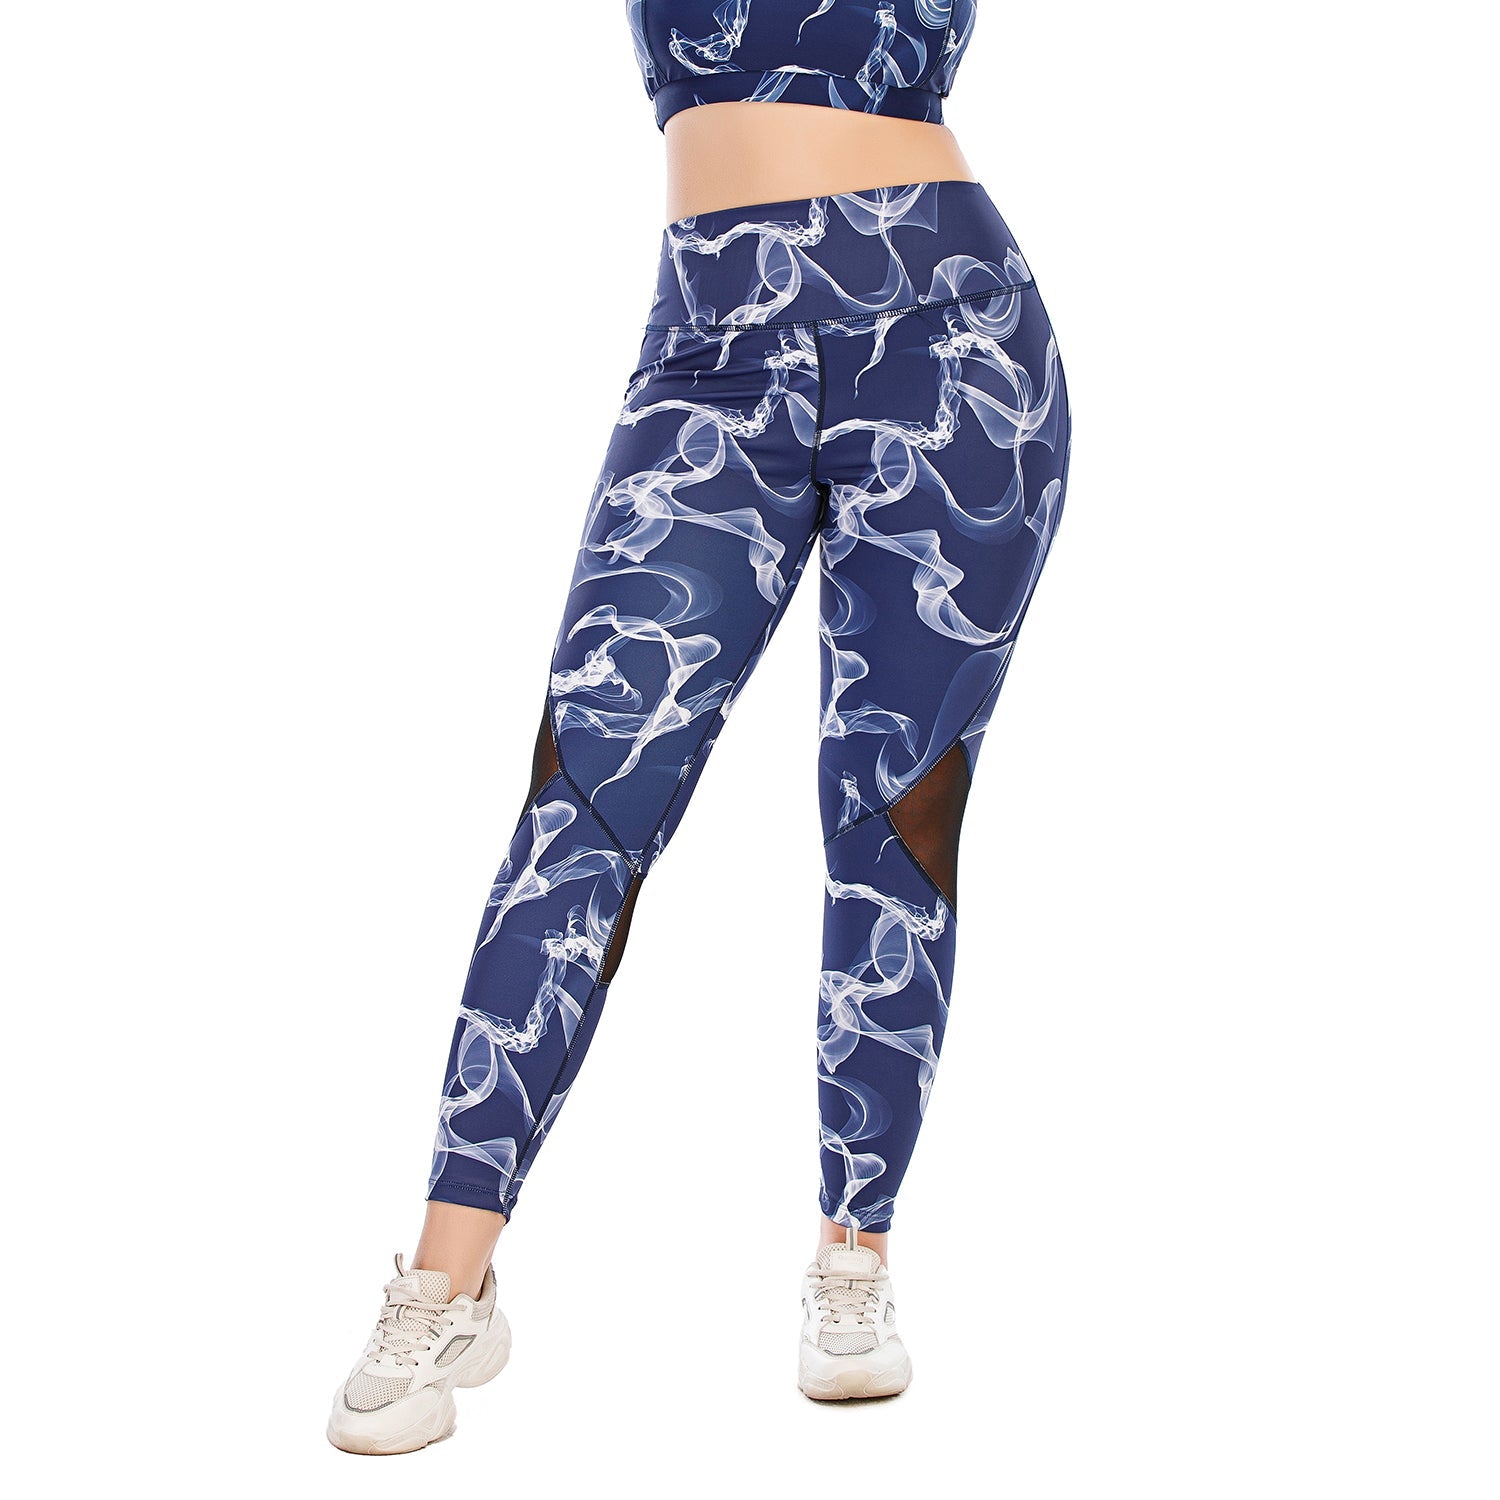 Printed Yoga Pants for Plus Size with Pocket